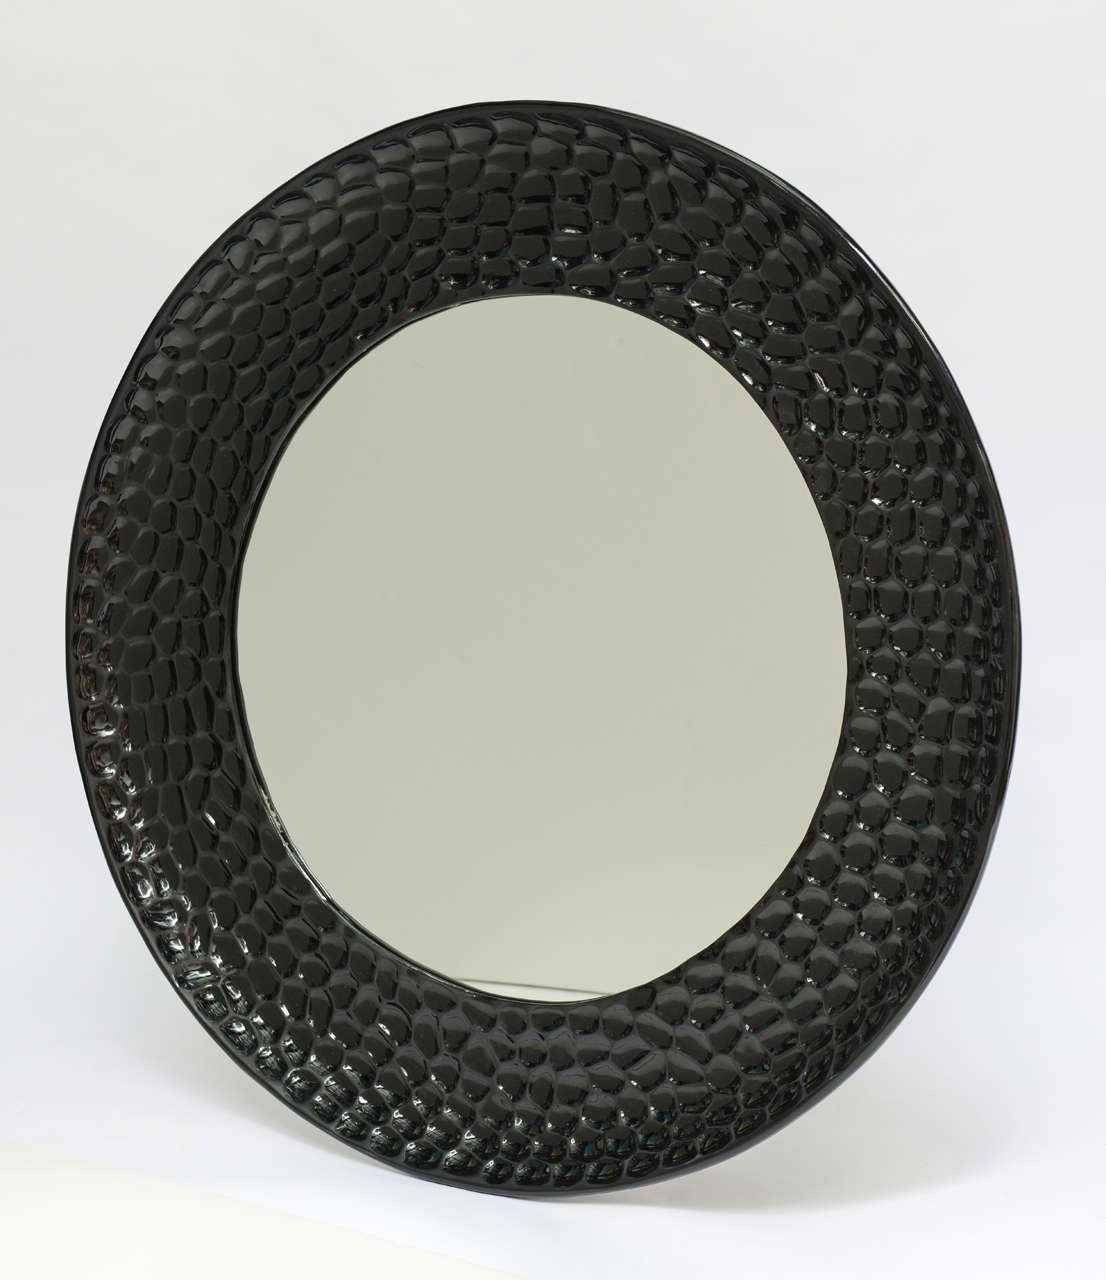 Beautiful design of that beveled mirror looks giving the feeling of a bees house. The mirror has been lacquered in black high gloss polyurethane paint by our own furniture restoration and finish by hand. This piece will give on any room a beautiful